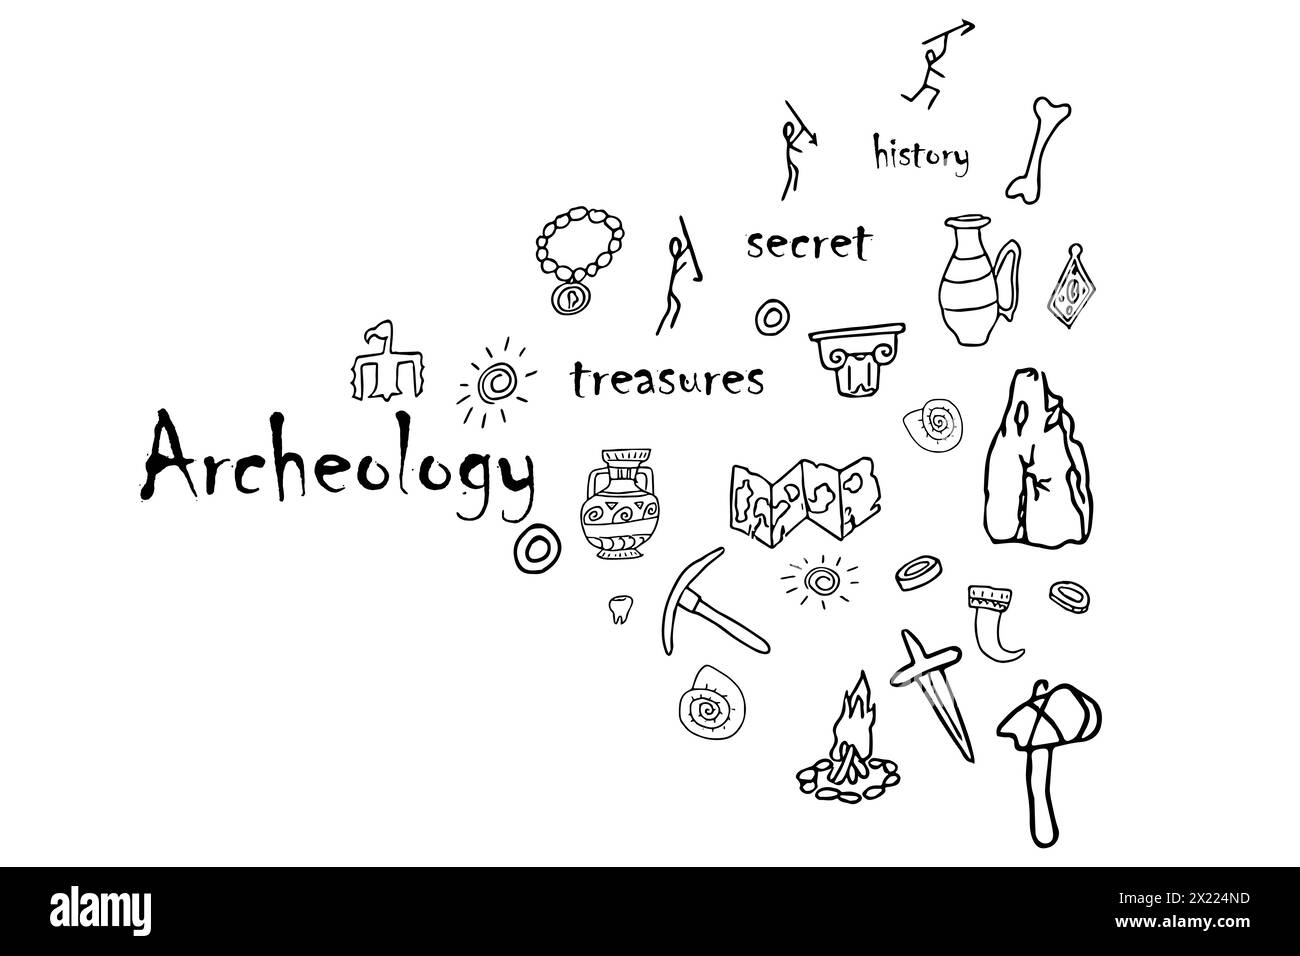 Doodle archeology, historical objects, tools, equipment with text isolated on white background stock vector illustration. Discovery, tribal civilization composition. Stock Vector